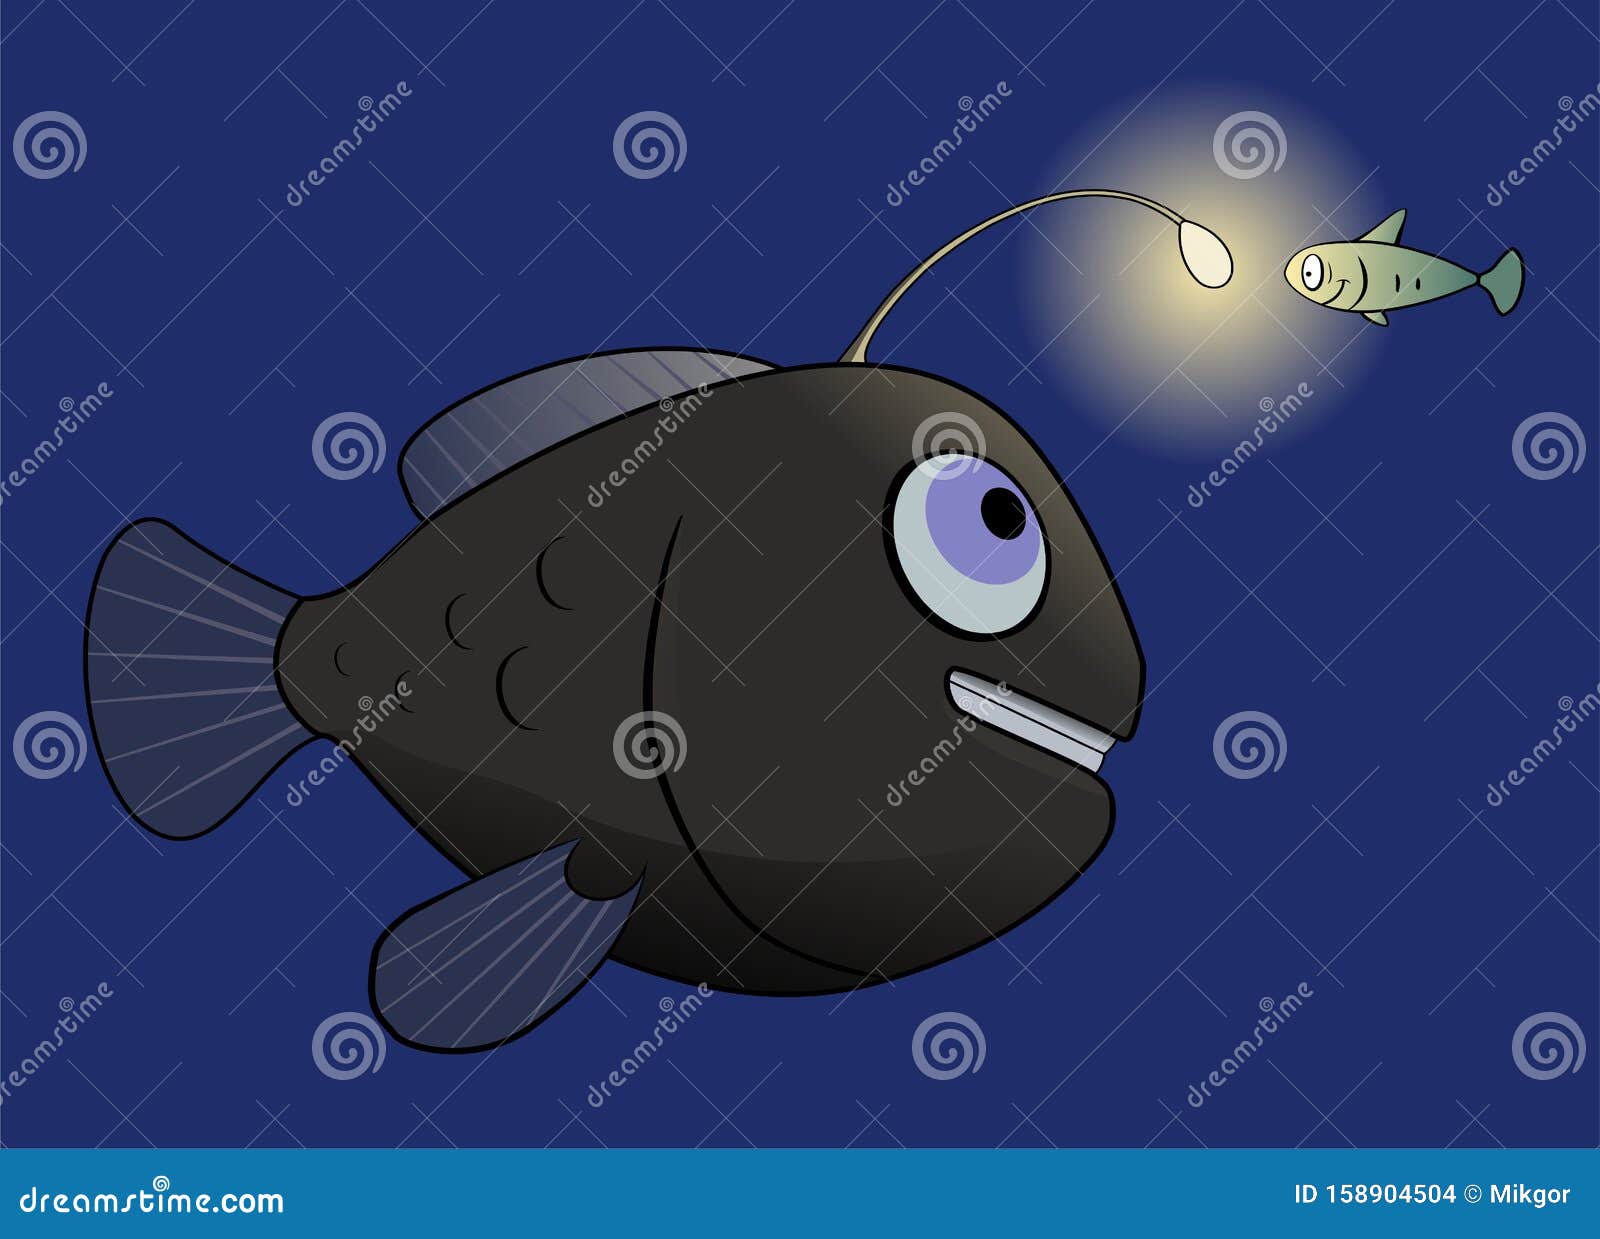 https://thumbs.dreamstime.com/z/depthwater-fish-hunter-angler-deep-sea-using-its-bait-lures-curious-little-his-future-victim-158904504.jpg